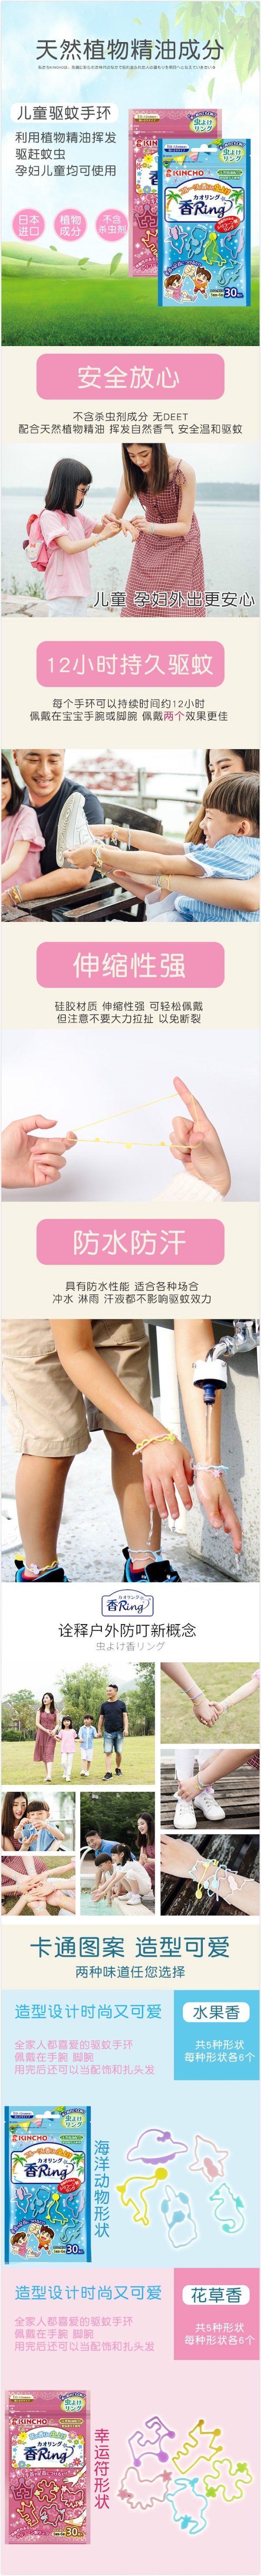 KINCHO KAORI RING Insect Repellent Ring (Flower Scent)